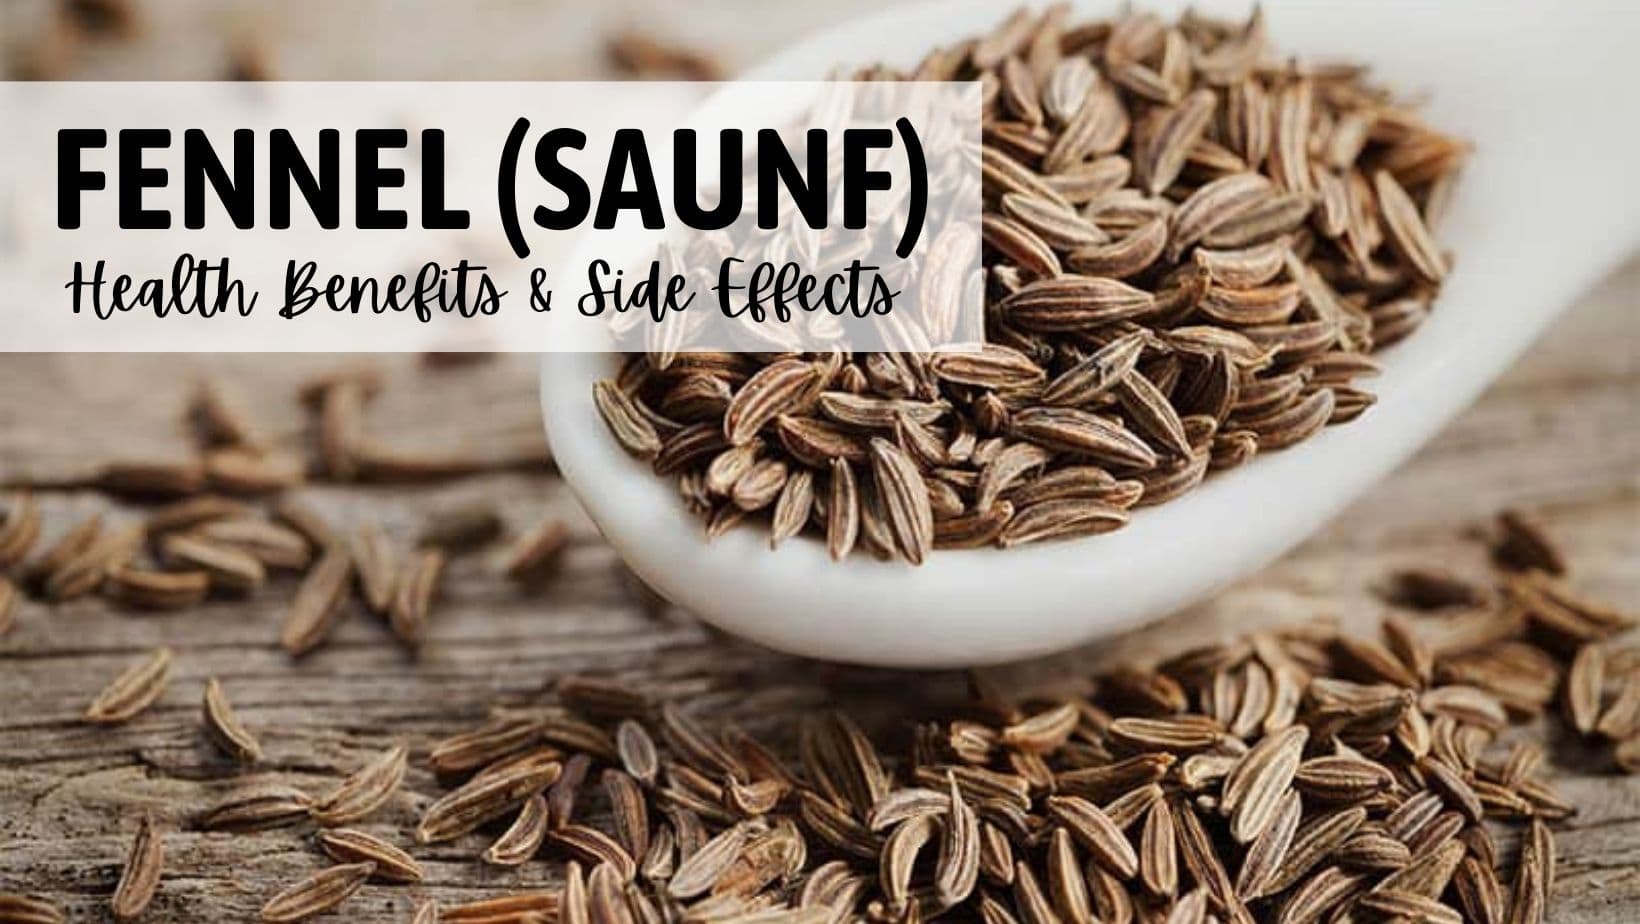 Fennel (Saunf): Health Benefits, Uses, Side Effects And More